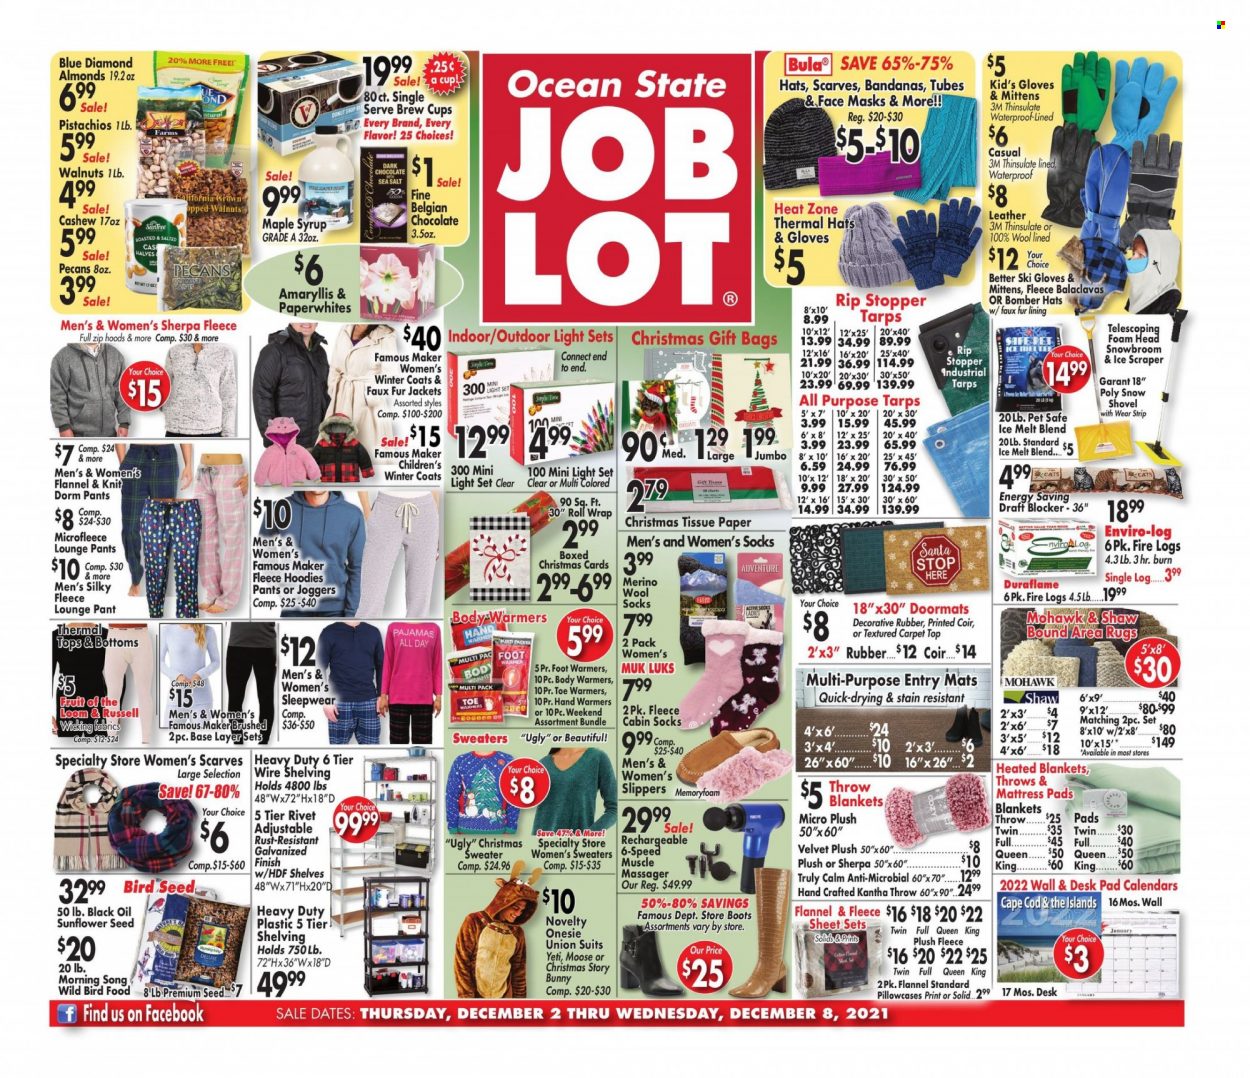 thumbnail - Ocean State Job Lot Flyer - 12/02/2021 - 12/08/2021 - Sales products - boots, slippers, chocolate, UglyDolls, Santa, dark chocolate, oil, maple syrup, syrup, almonds, walnuts, pecans, pistachios, Blue Diamond, toilet paper, tissues, gloves, cup, bag, eraser, paper, blanket, pillowcase, mattress protector, hoodie, animal food, bird food, plant seeds, massager, coat, jacket, winter coat, pants, t-shirt, tops, sweater, joggers, socks, wool socks, scarf, hat, pajamas, tarps, hand warmer, light set, rug, carpet, area rug, shovel, snow shovel, face mask, ice melter, sleepwear. Page 1.